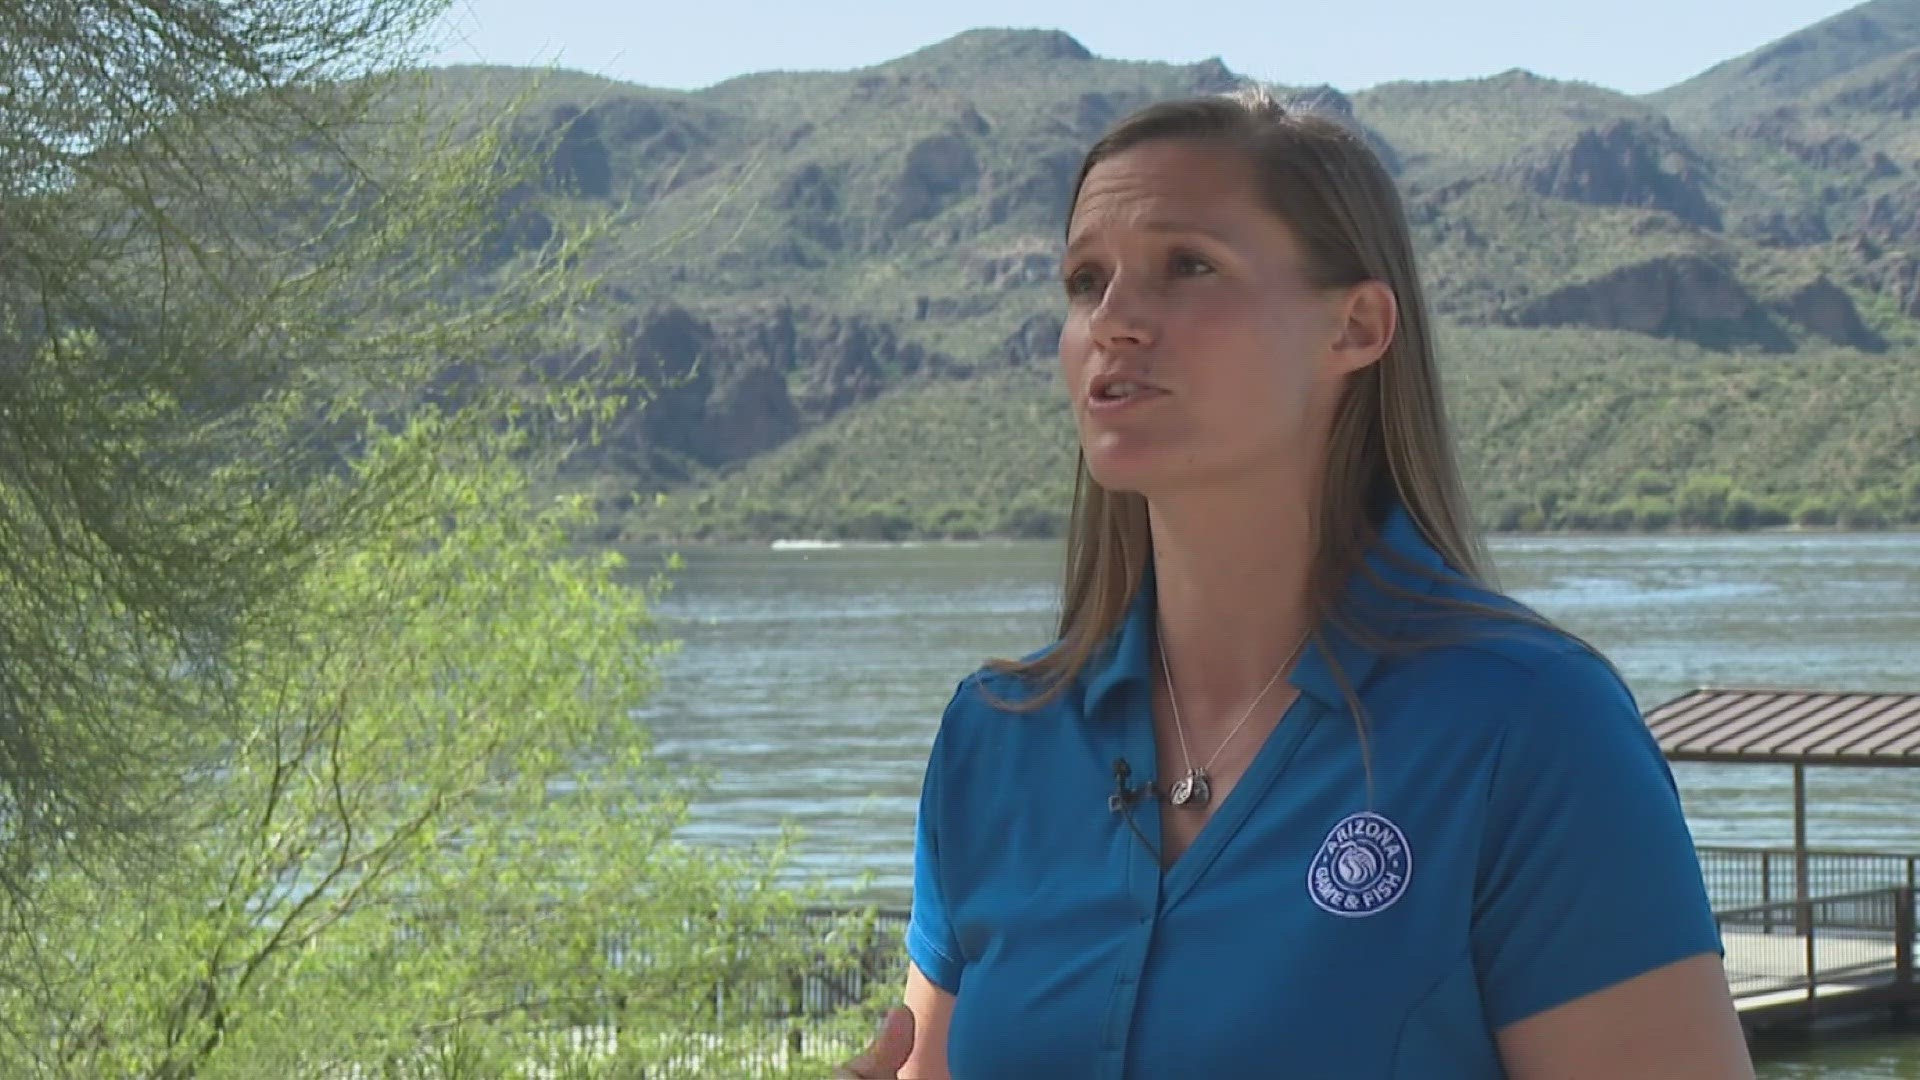 Arizona officials are currently working to solve how to fight golden algae toxic blooms in Salt River connector lakes.